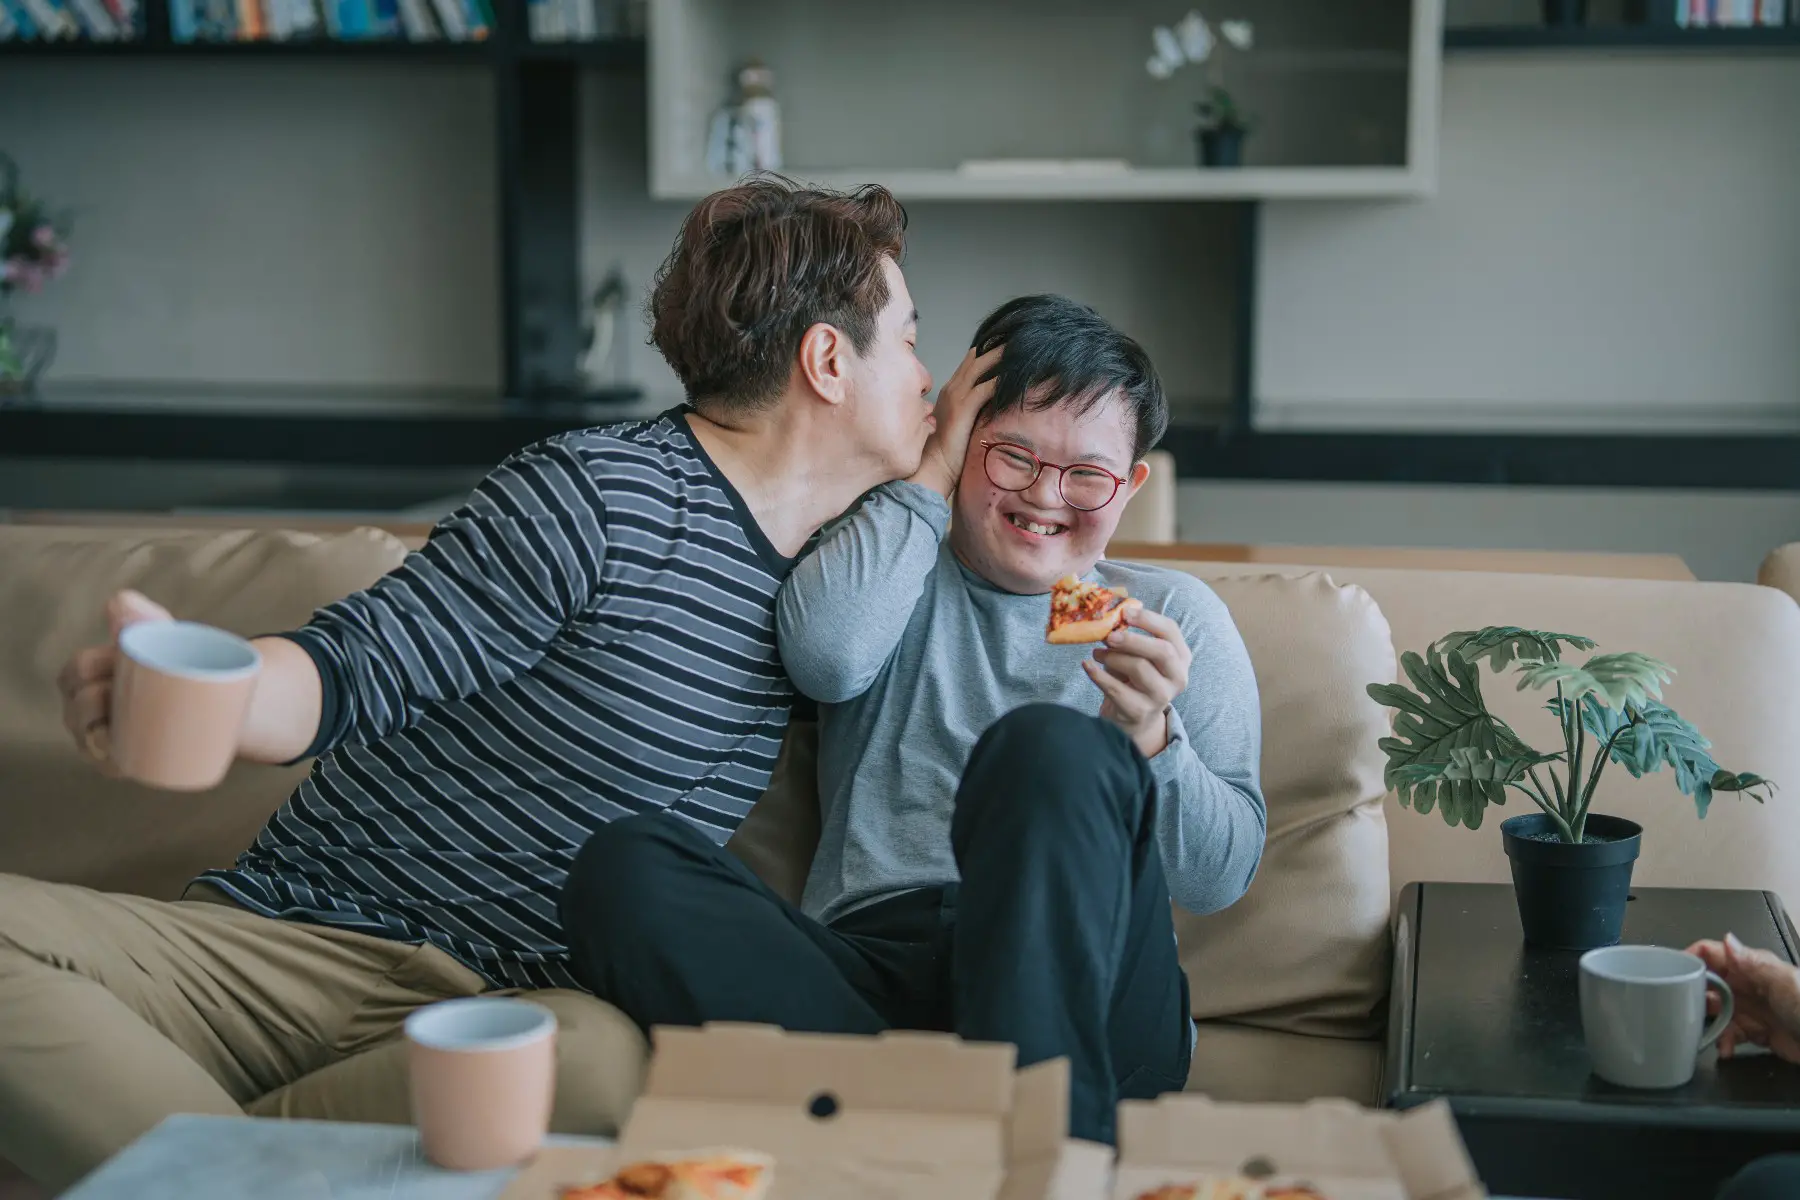 Father leaning in to kiss his son with down syndrome, who is laughing and trying to avoid it. They are sitting on the sofa eating pizza.